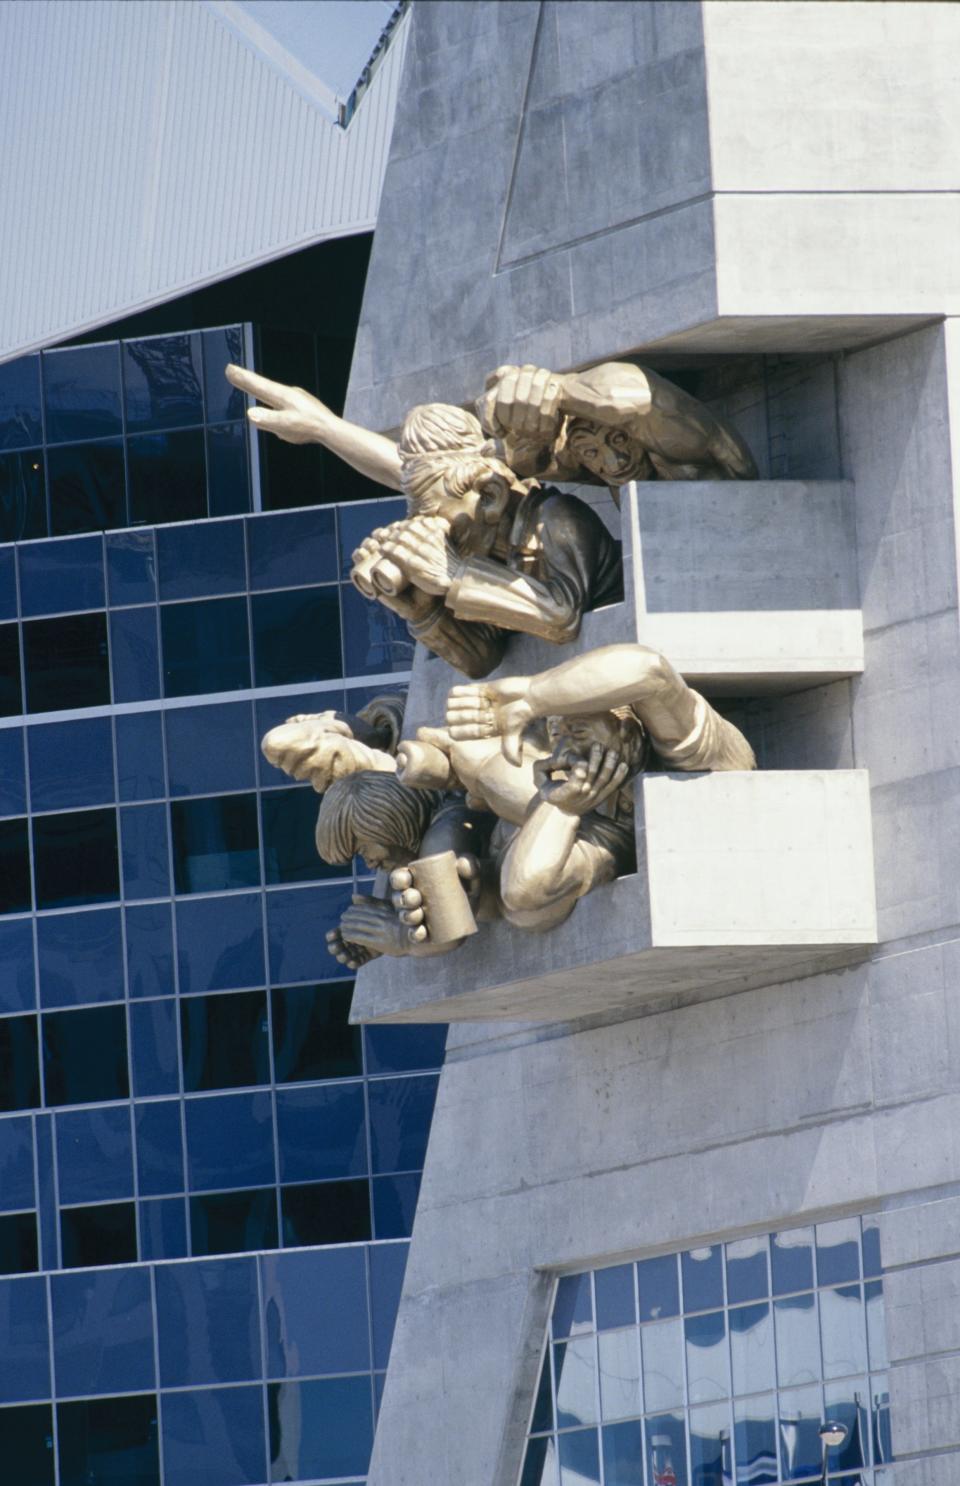 June 11, 1989: Exterior view with architectural detail of SkyDome during the Toronto Blue Jays game against the Detroit Tigers. (Photo by Rick Stewart/Getty Images)